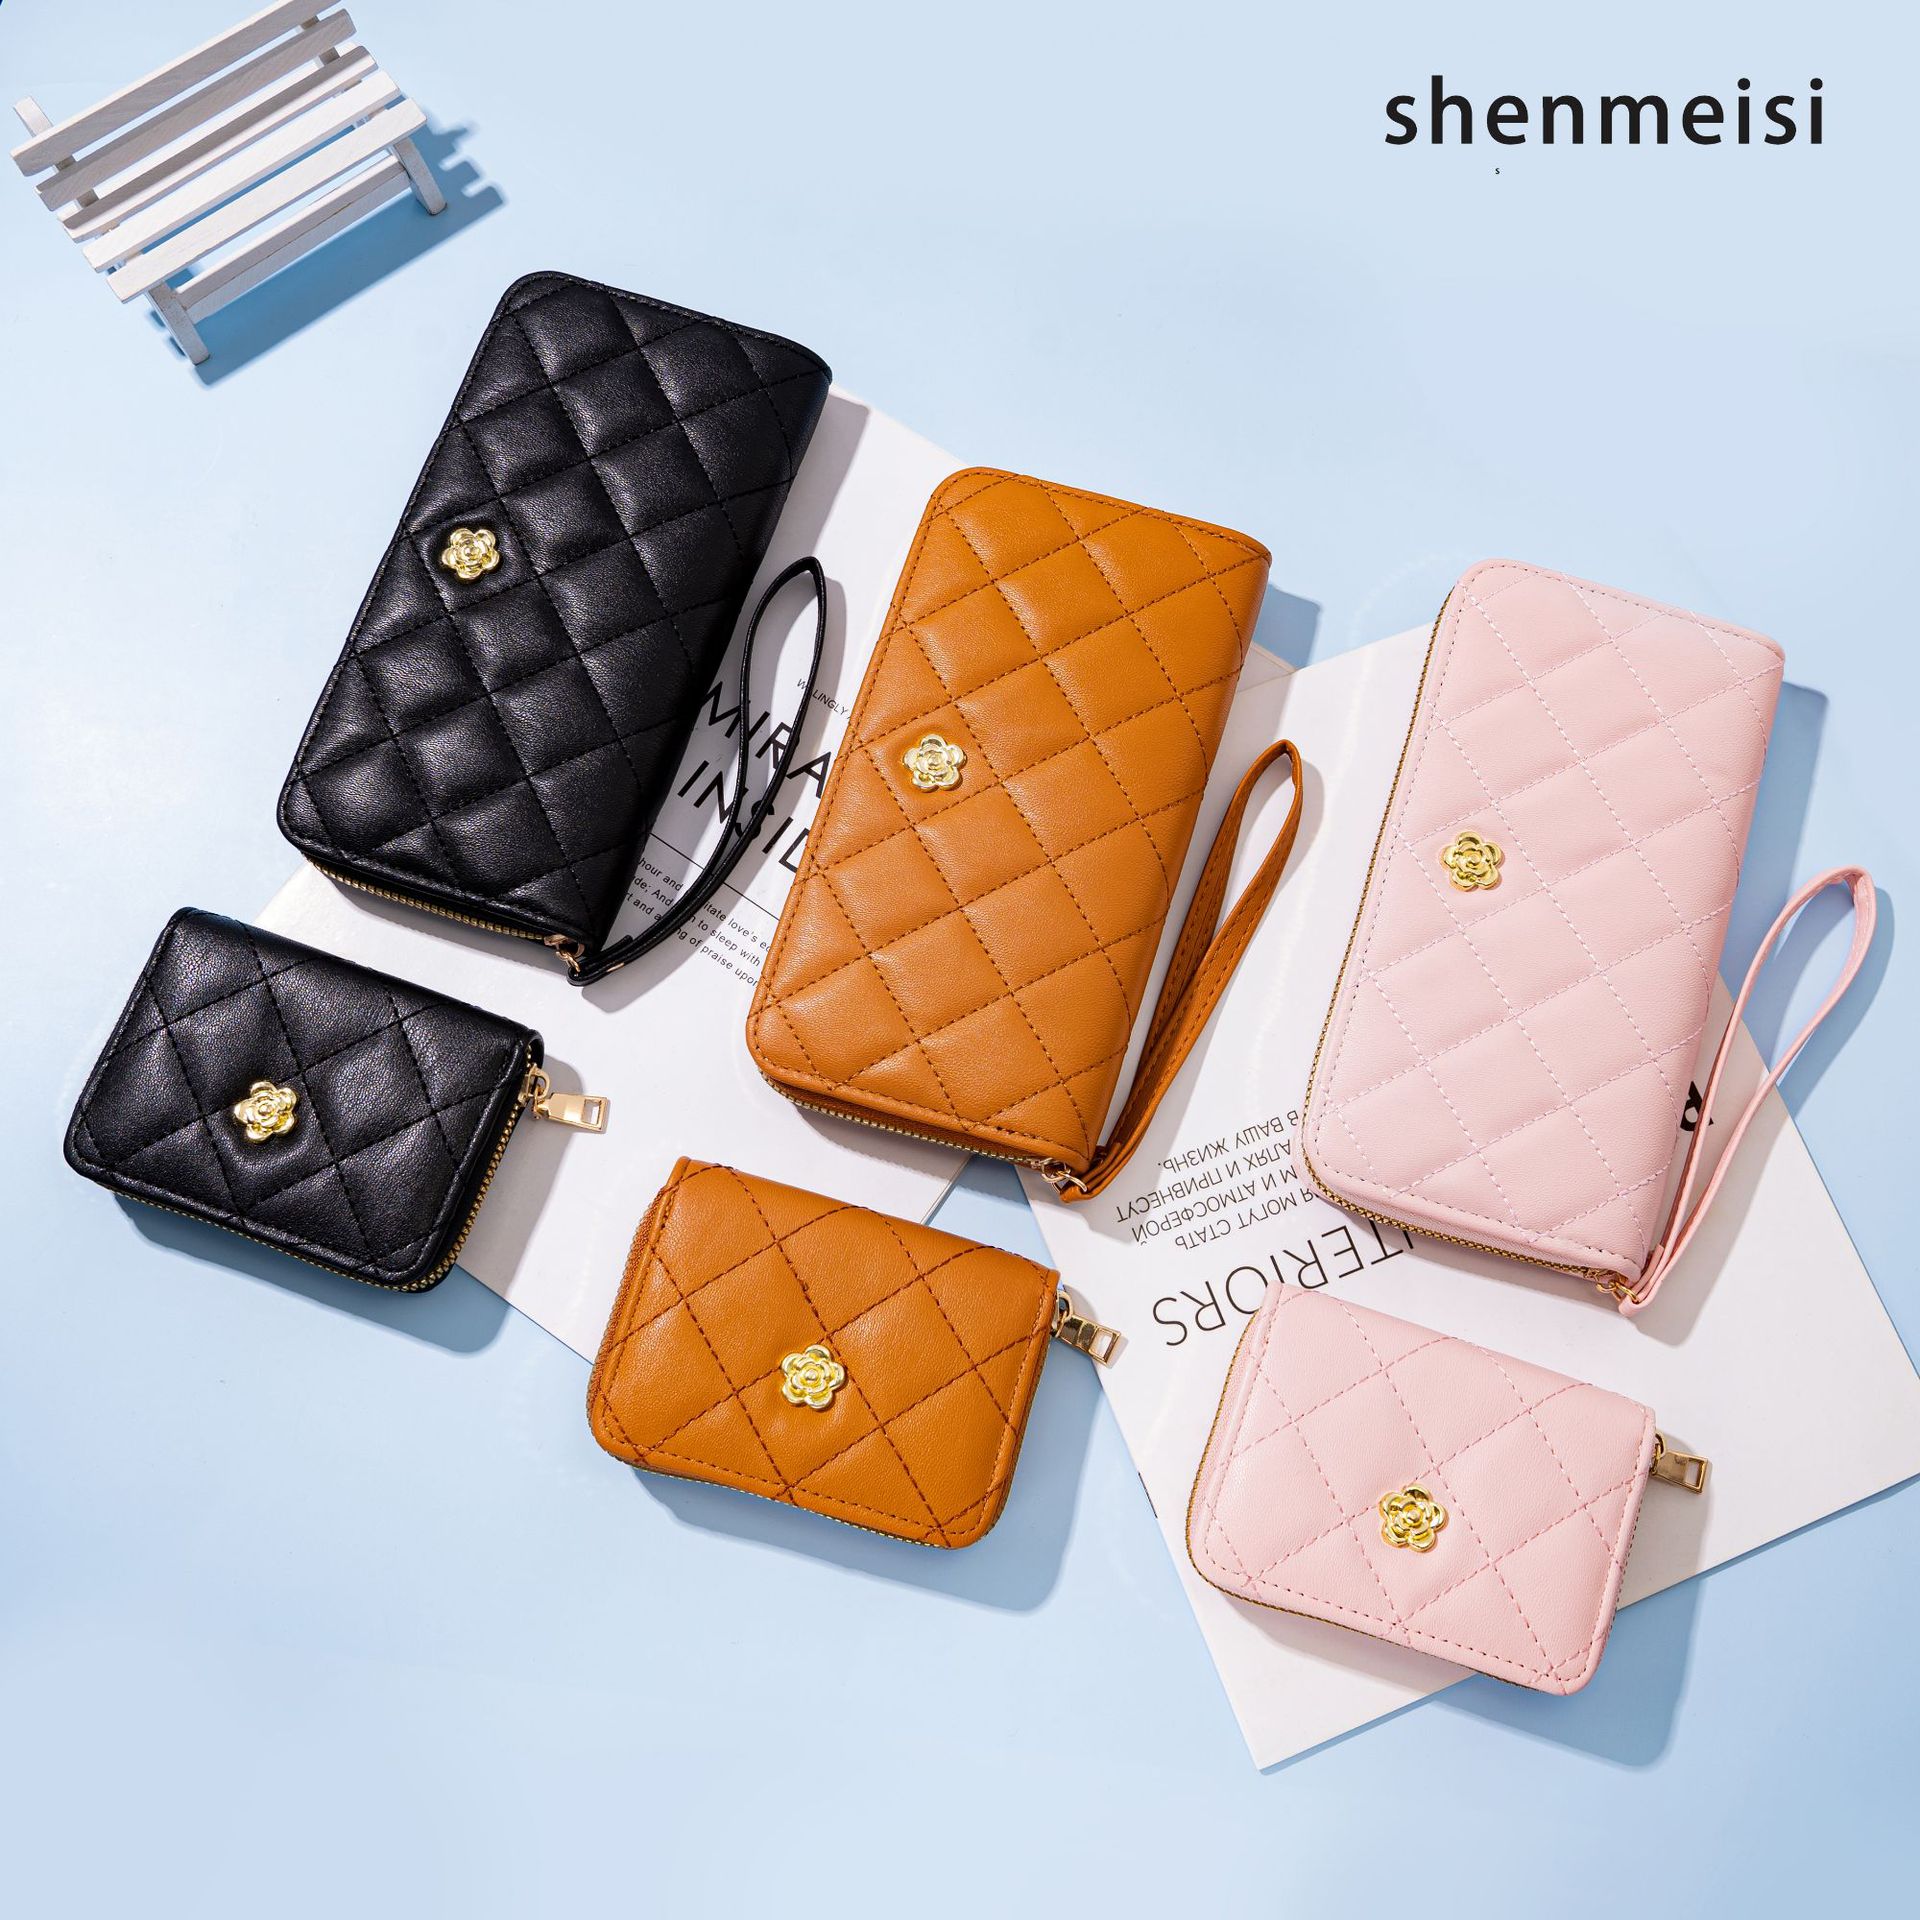 New European and American Entry Lux Fresh Classic Style Women's Wrist Wallet Card Holder Multiple Card Slots Women's Cross-Border Mobile Phone Bag